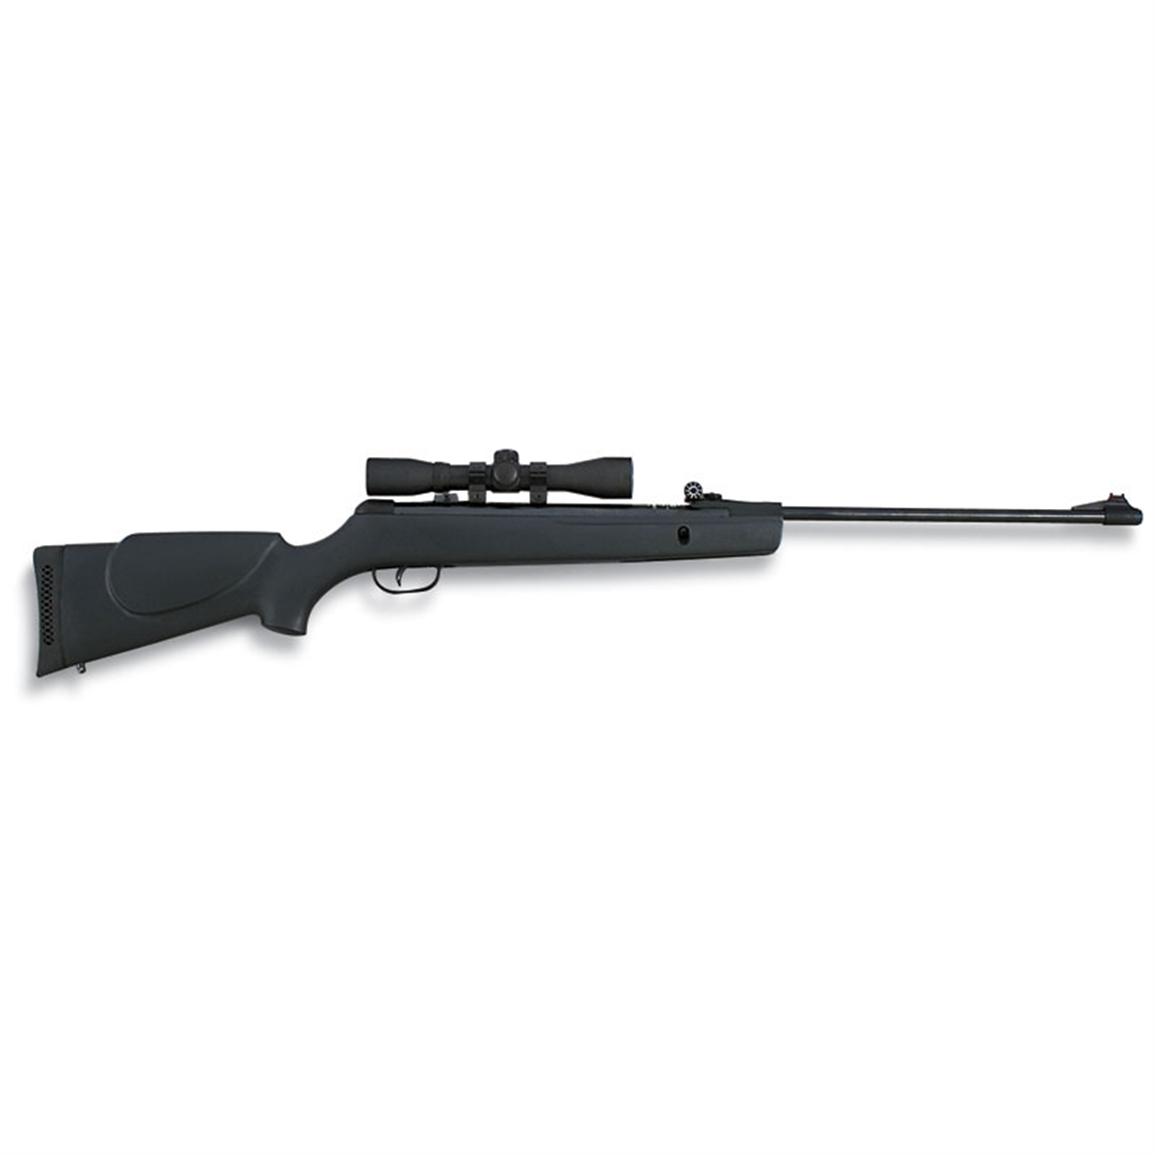 Gamo Shadow Pellet Rifle With Scope Air Bb Rifles At Sportsman S Guide